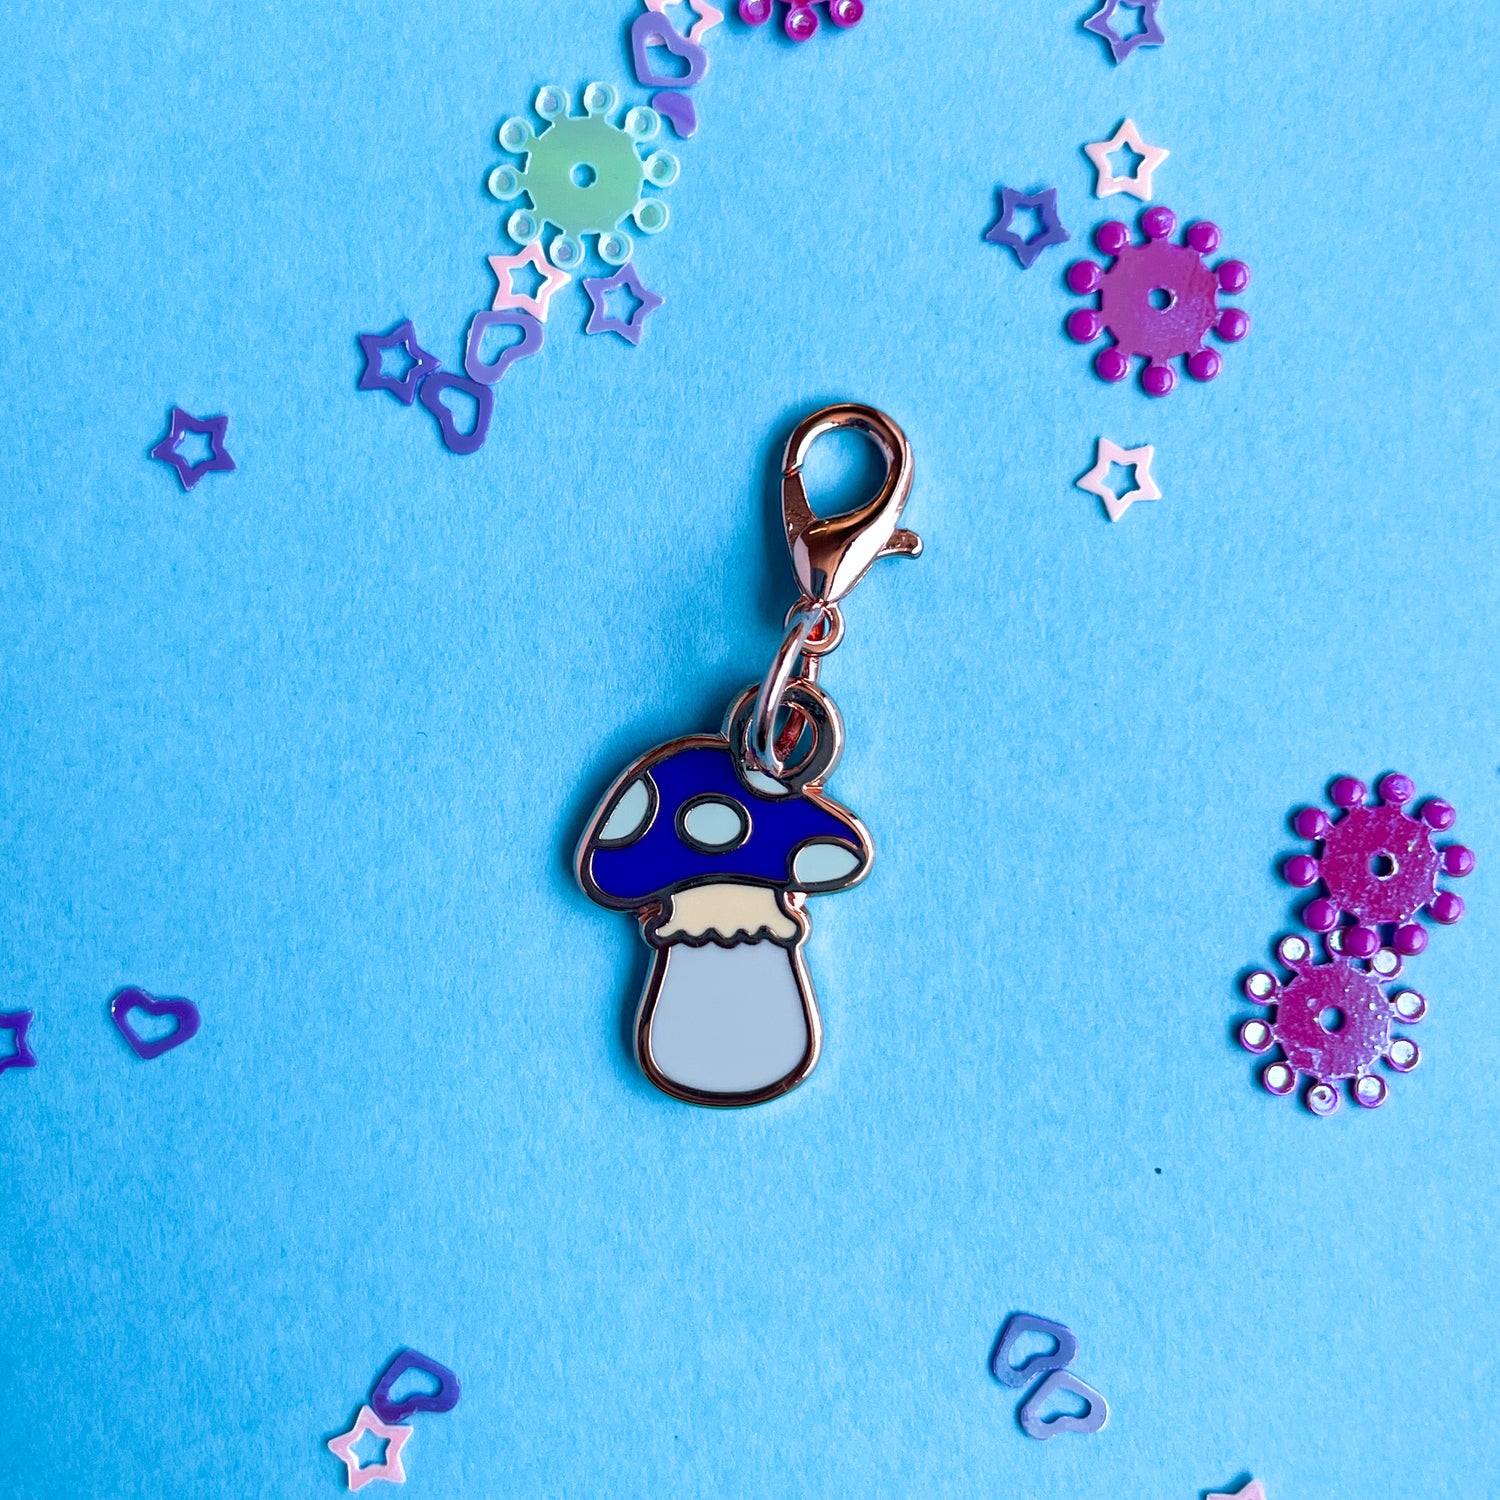 A mushroom shaped lobster claw clasp charm with a purple head and blue spots on a blue background with purple confetti.